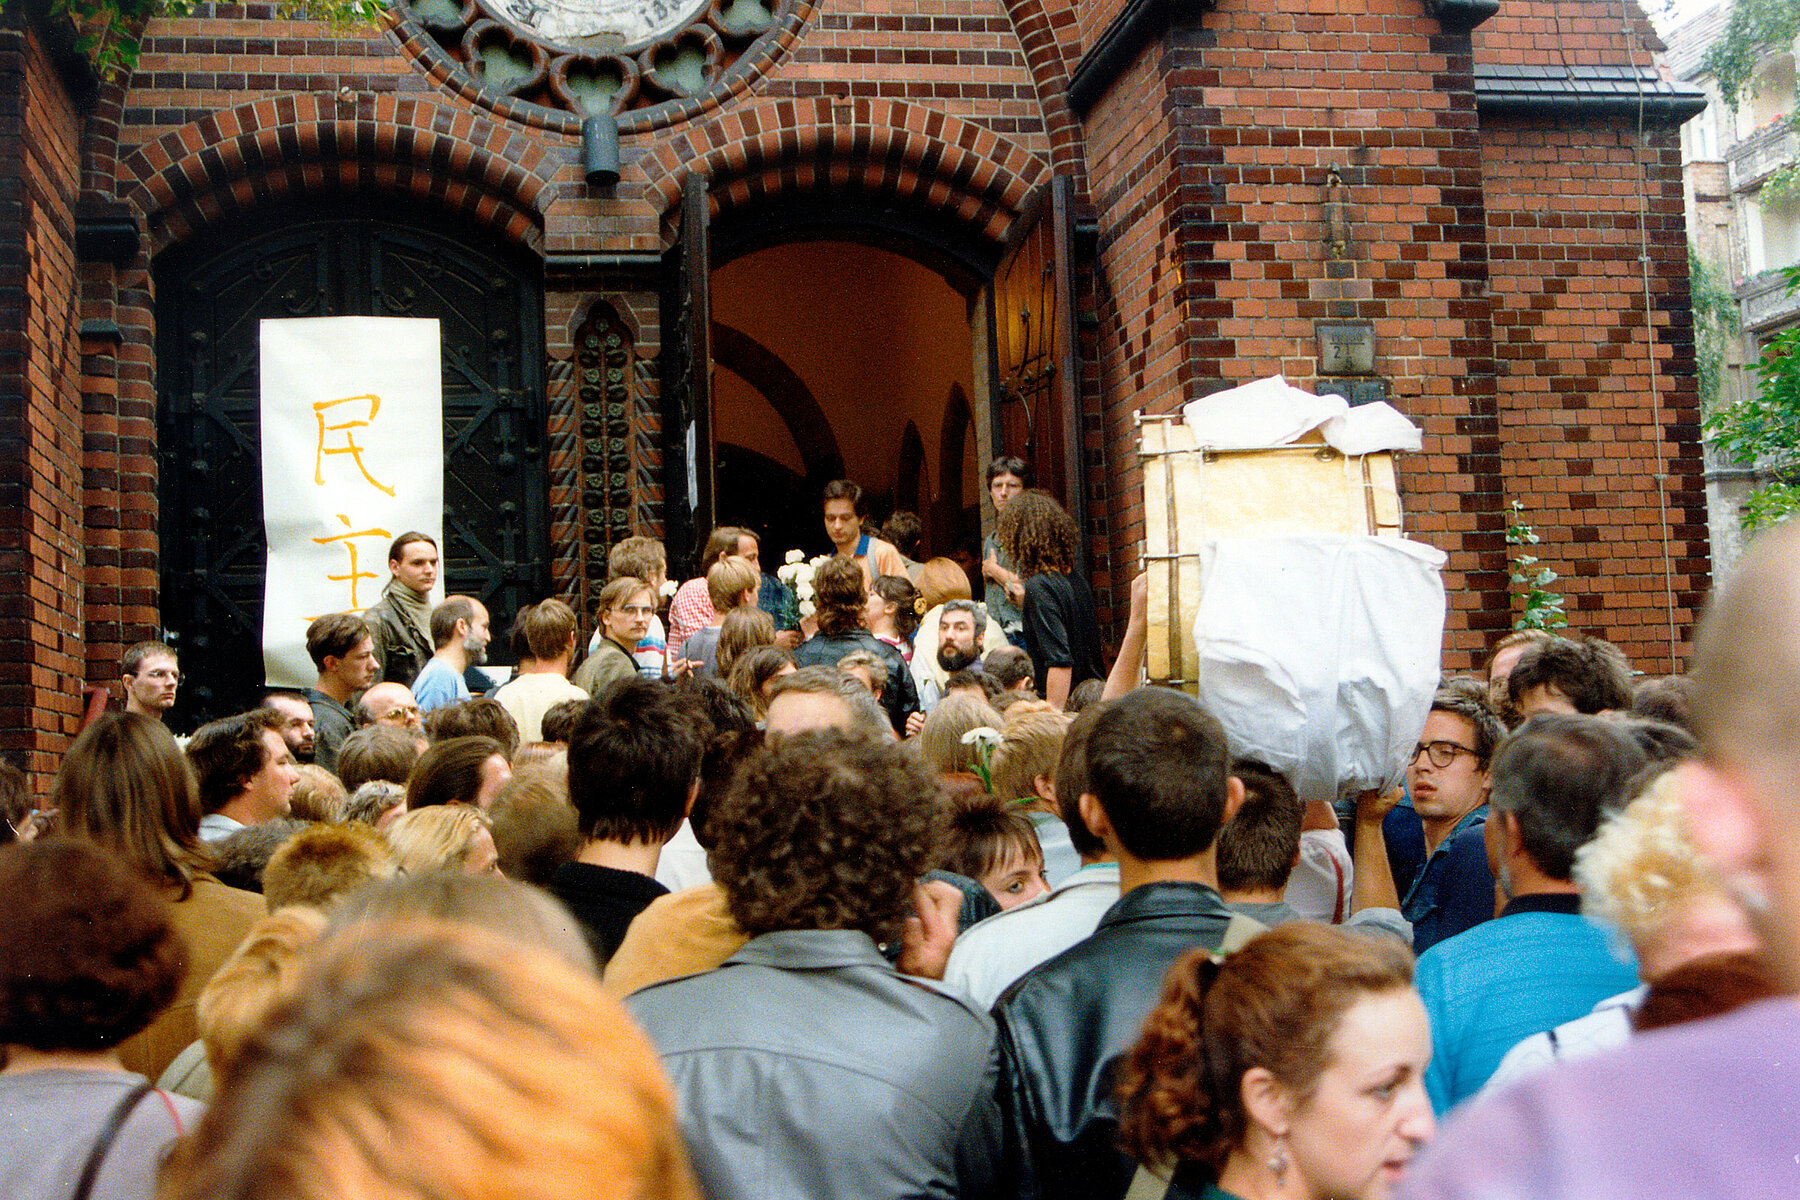 A crowd of people gather in front of the Samariterkirche.